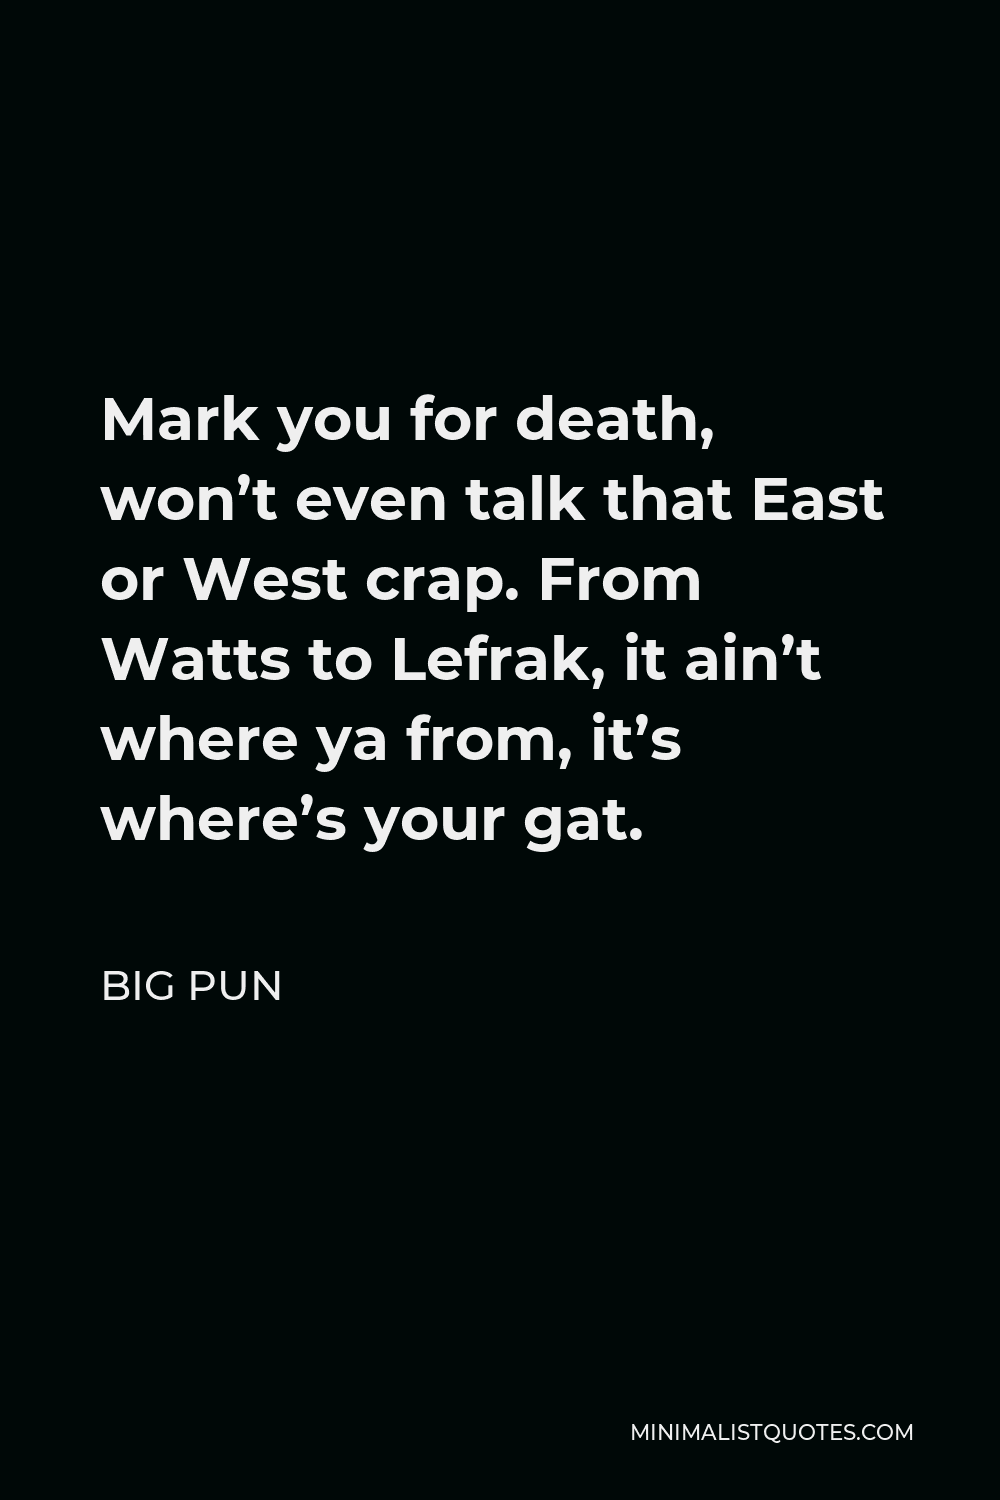 Big Pun Quote - Mark you for death, won’t even talk that East or West crap. From Watts to Lefrak, it ain’t where ya from, it’s where’s your gat.